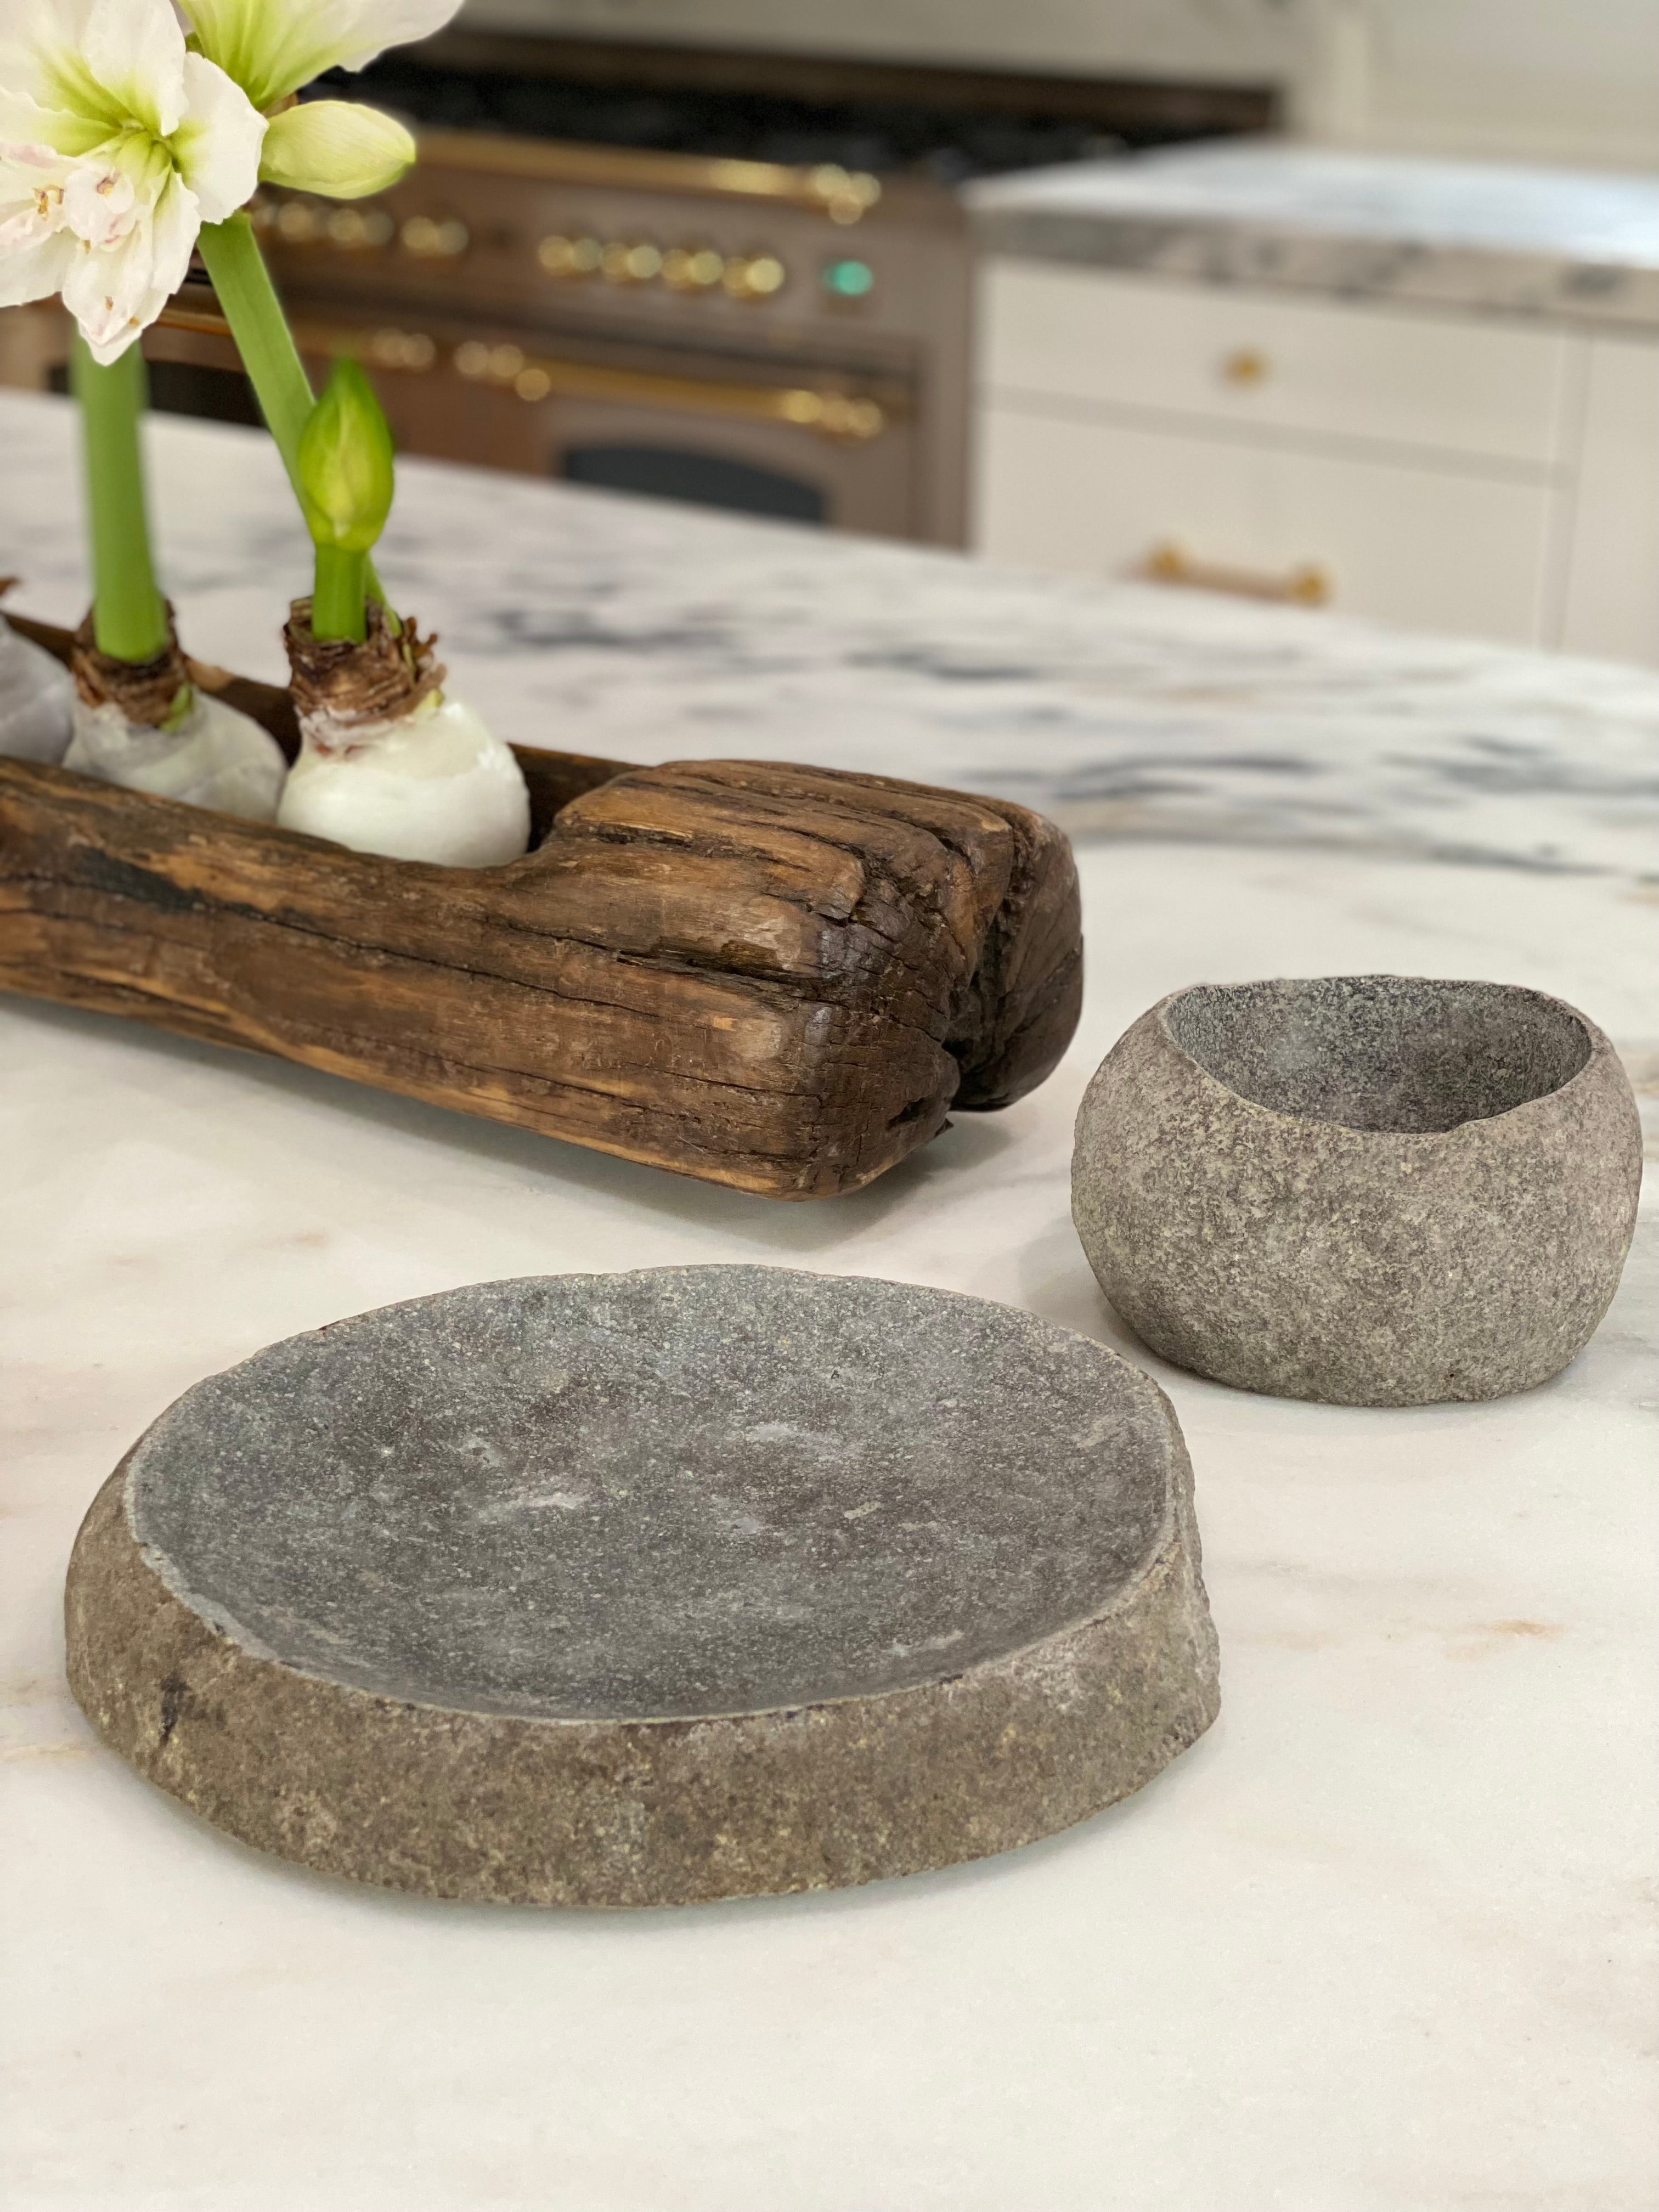 Stone bowls and trays- each vary!